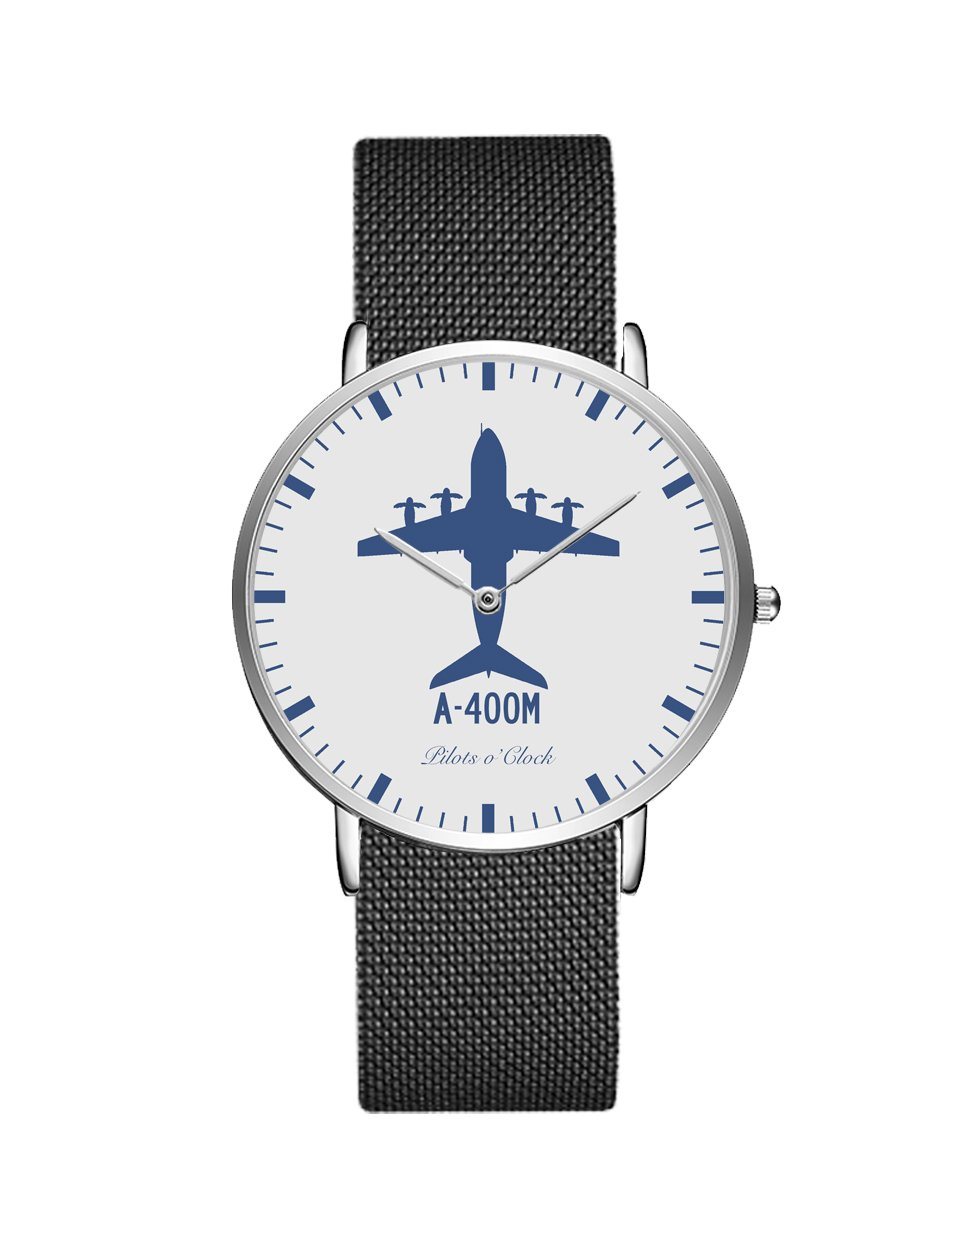 Airbus A400M Stainless Steel Strap Watches Pilot Eyes Store Silver & Black Stainless Steel Strap 